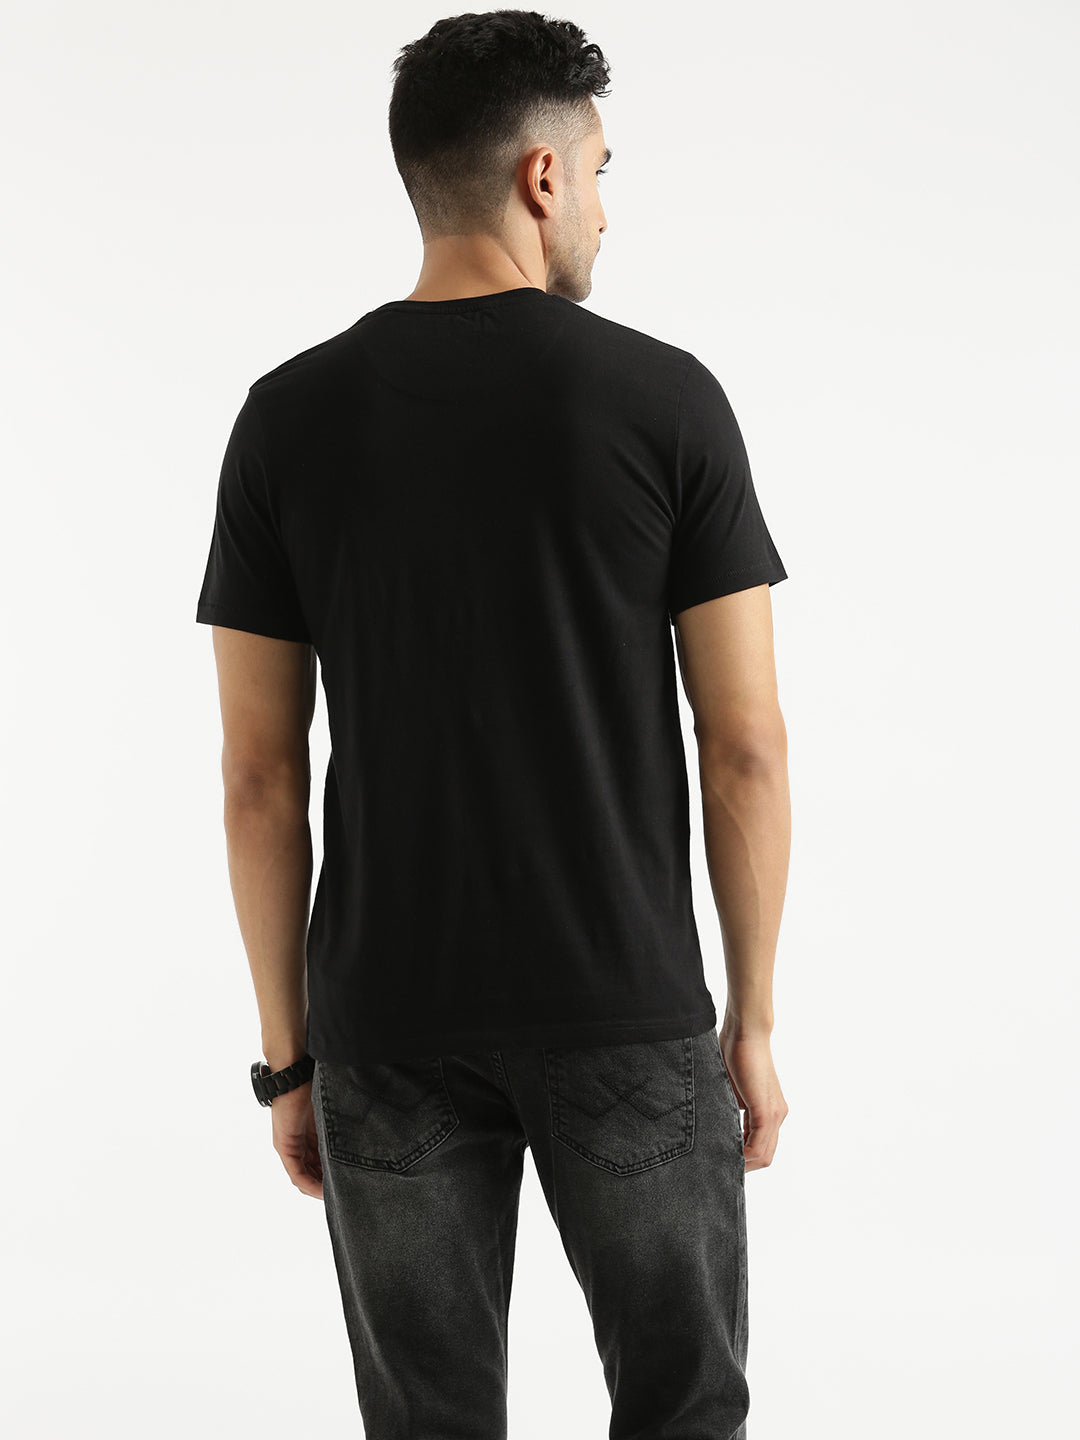 Wrogn Perspective Printed T-shirt